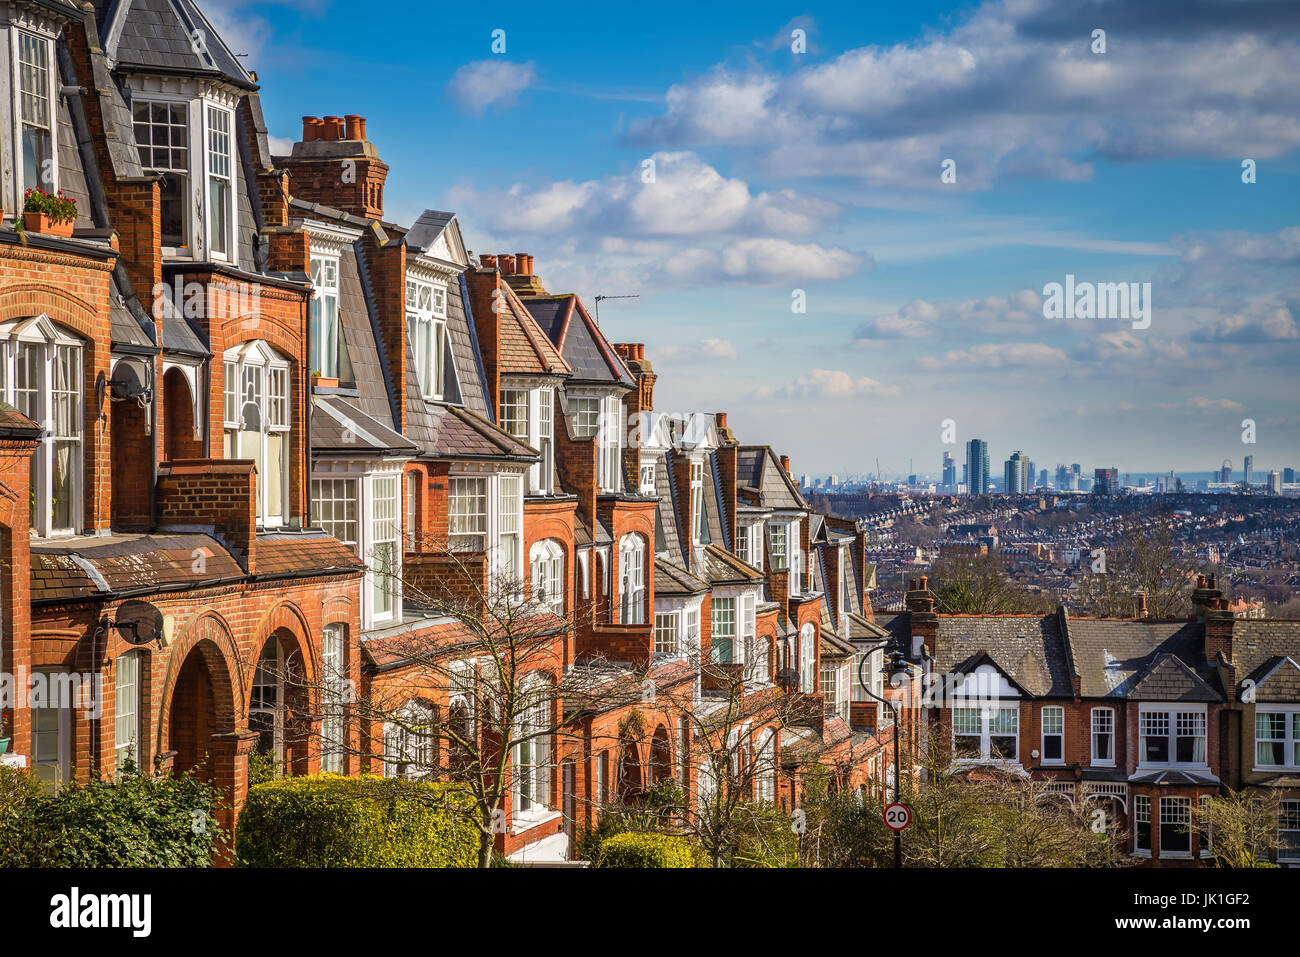 London, England - Typical brick houses and flats and panoramic view of london on a nice summer morning with blue sky and clouds taken from Muswell Hil Stock Photo